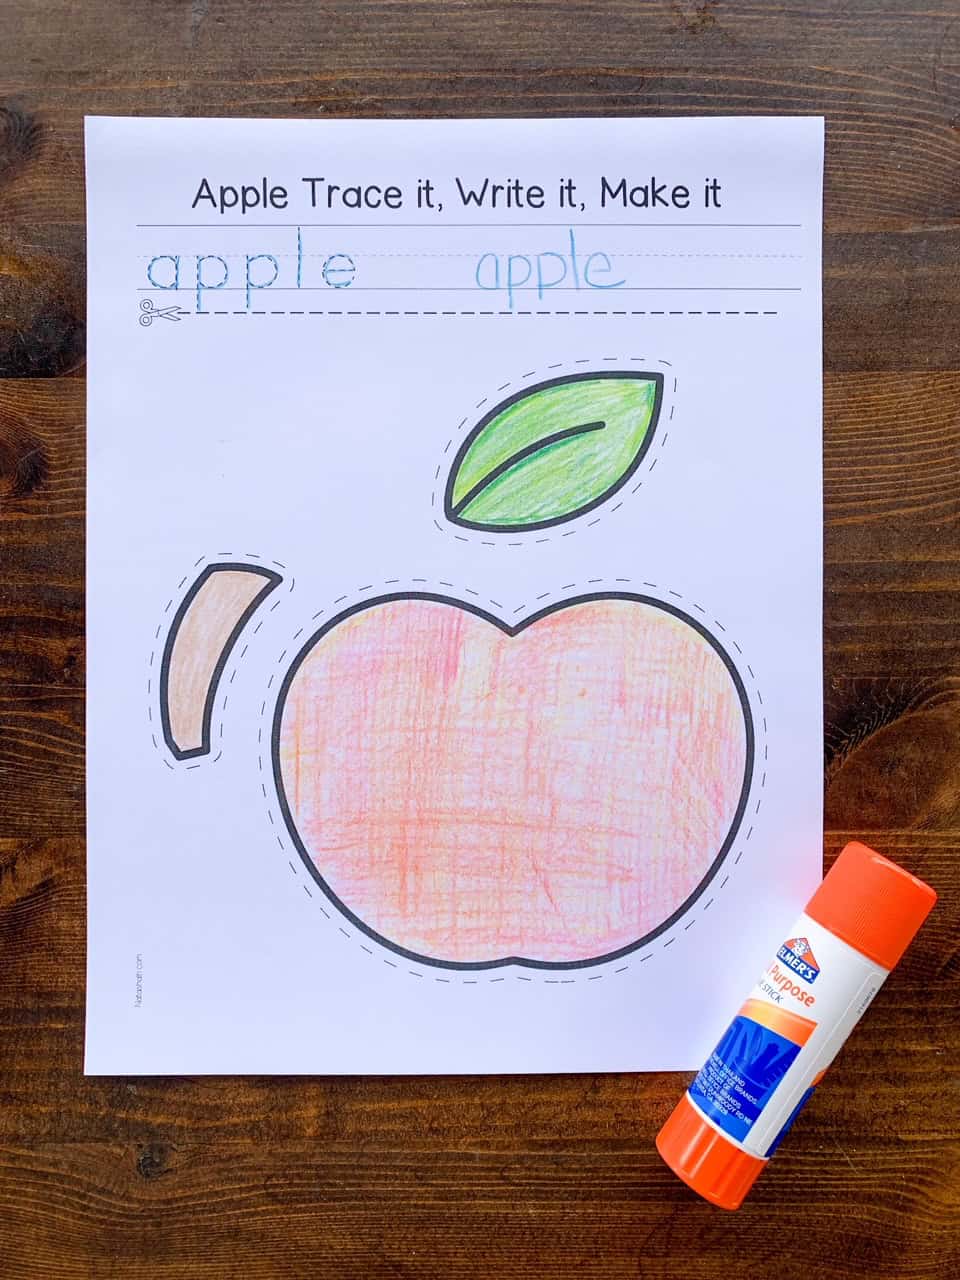 A photo of a colored but not cut out apple craft